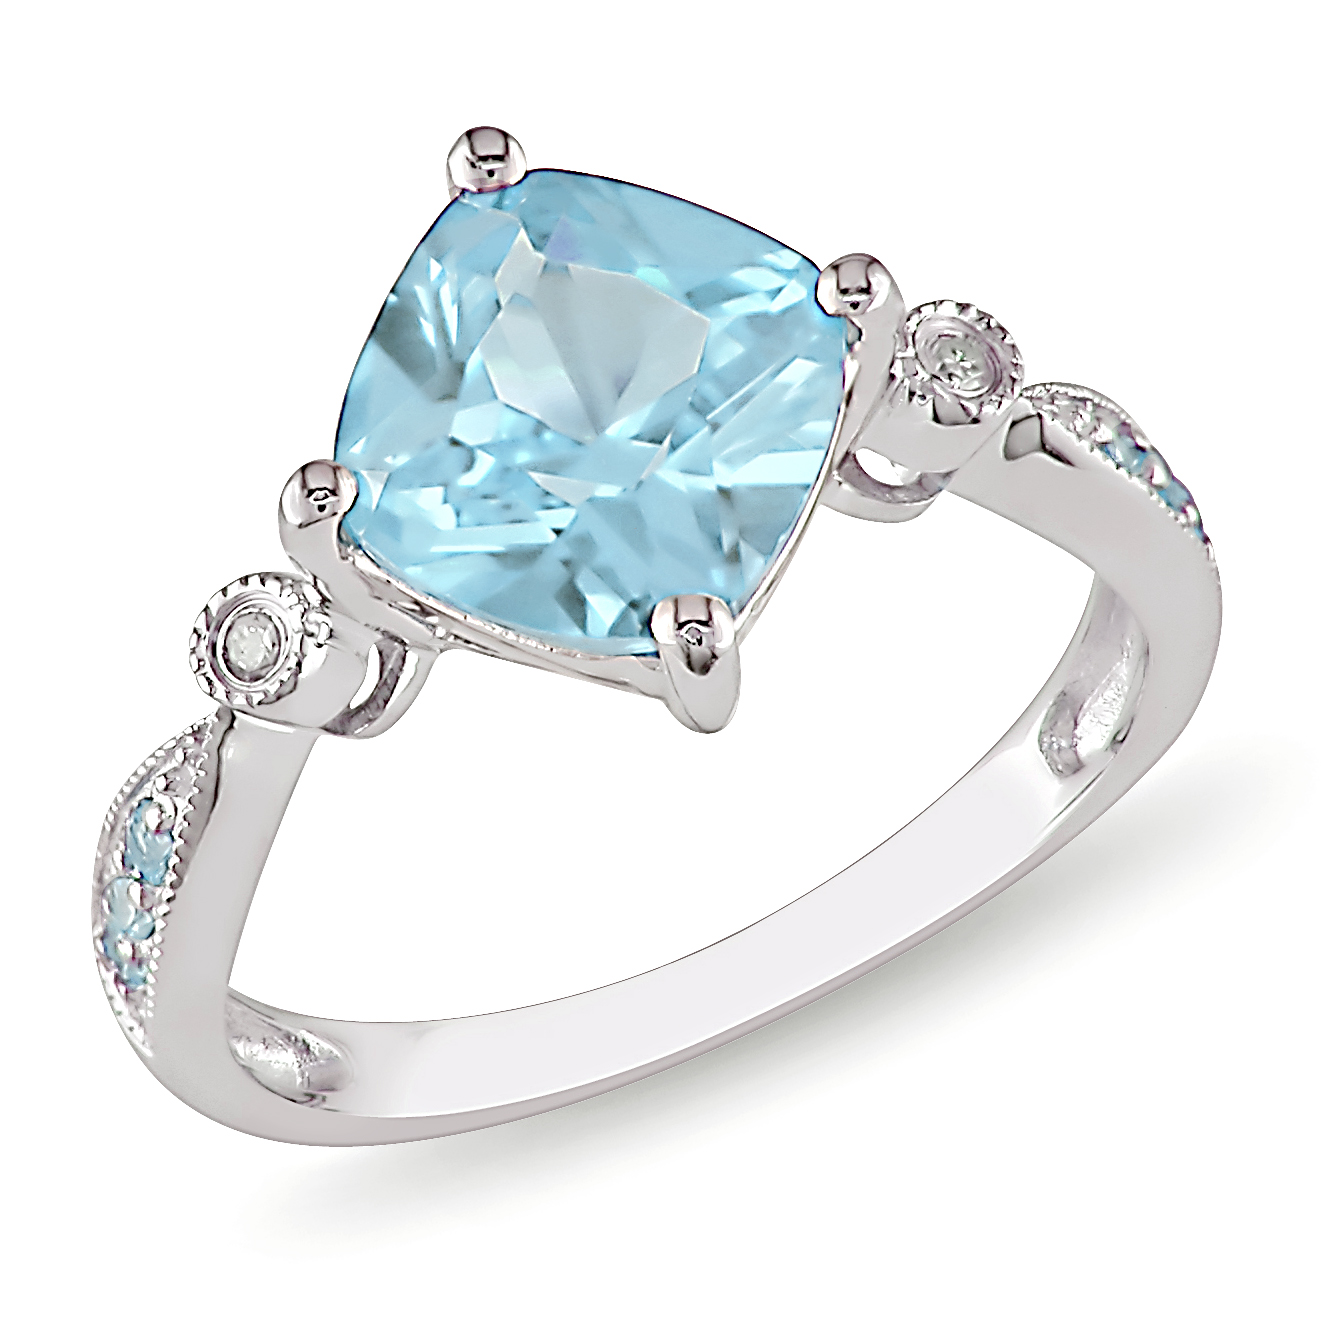 Amour 0.02 Carat T.W. Diamond and 2 3/5 Carat T.G.W. Blue Topaz Fashion Ring in Sterling Silver I3